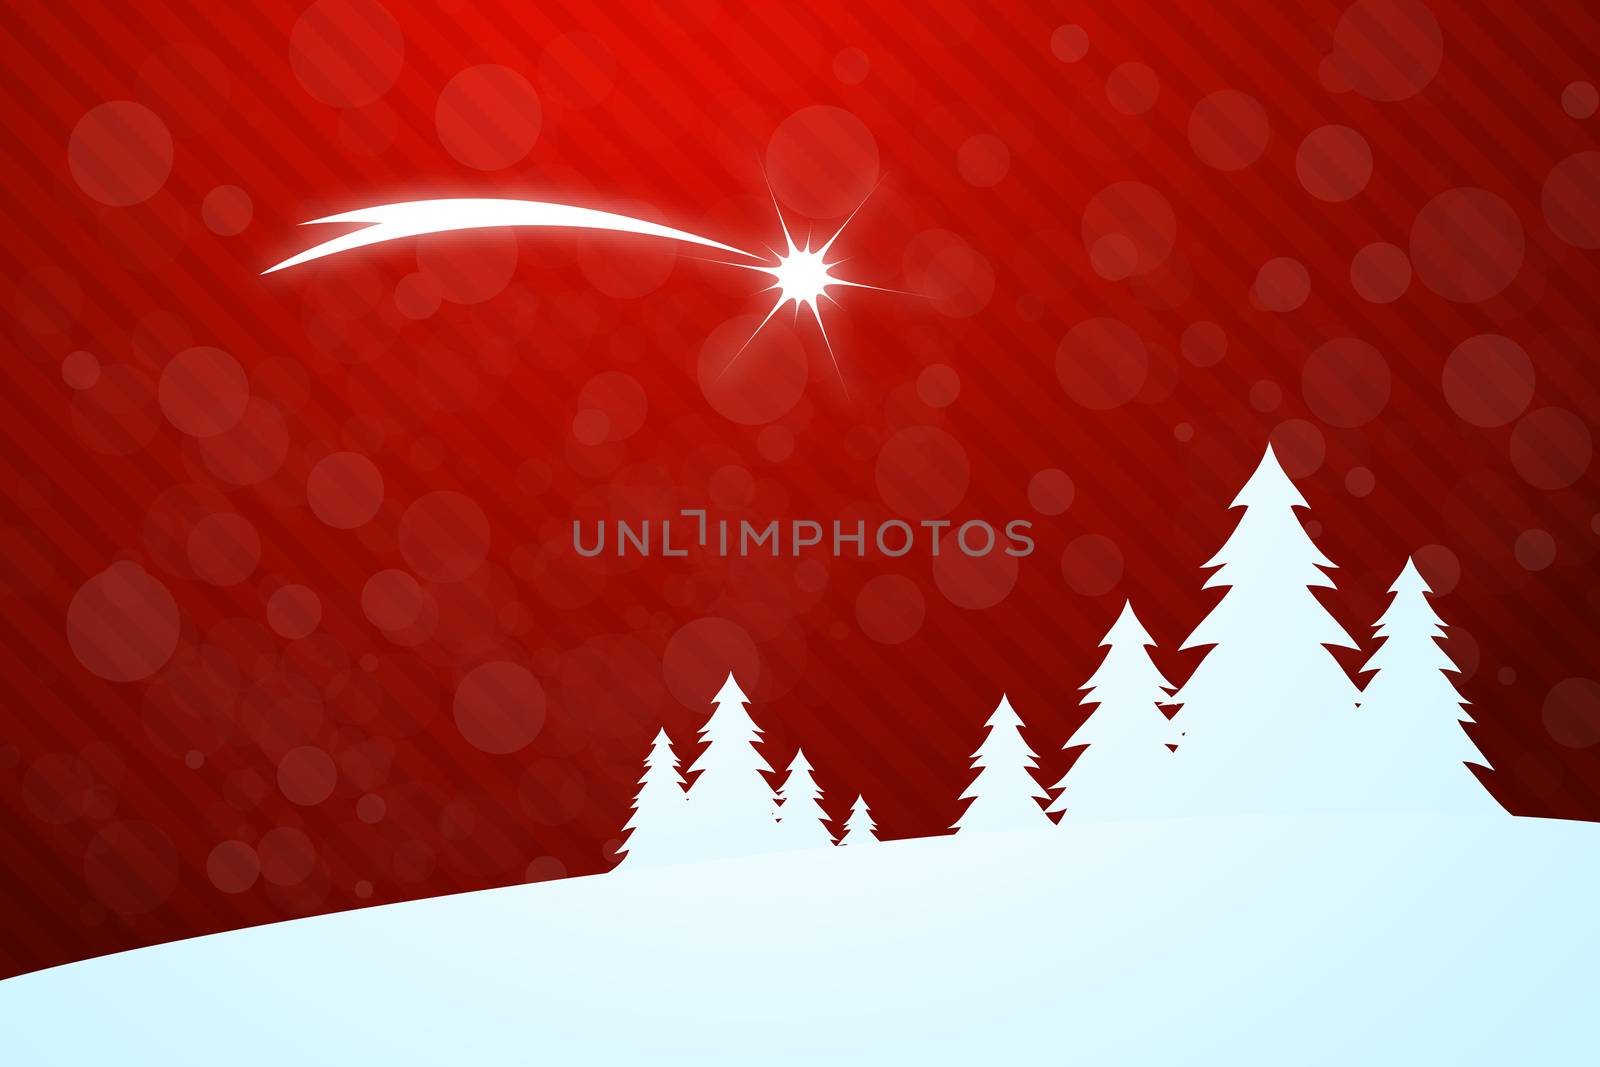 Christmas Greeting Card with Christmas Trees and falling Star